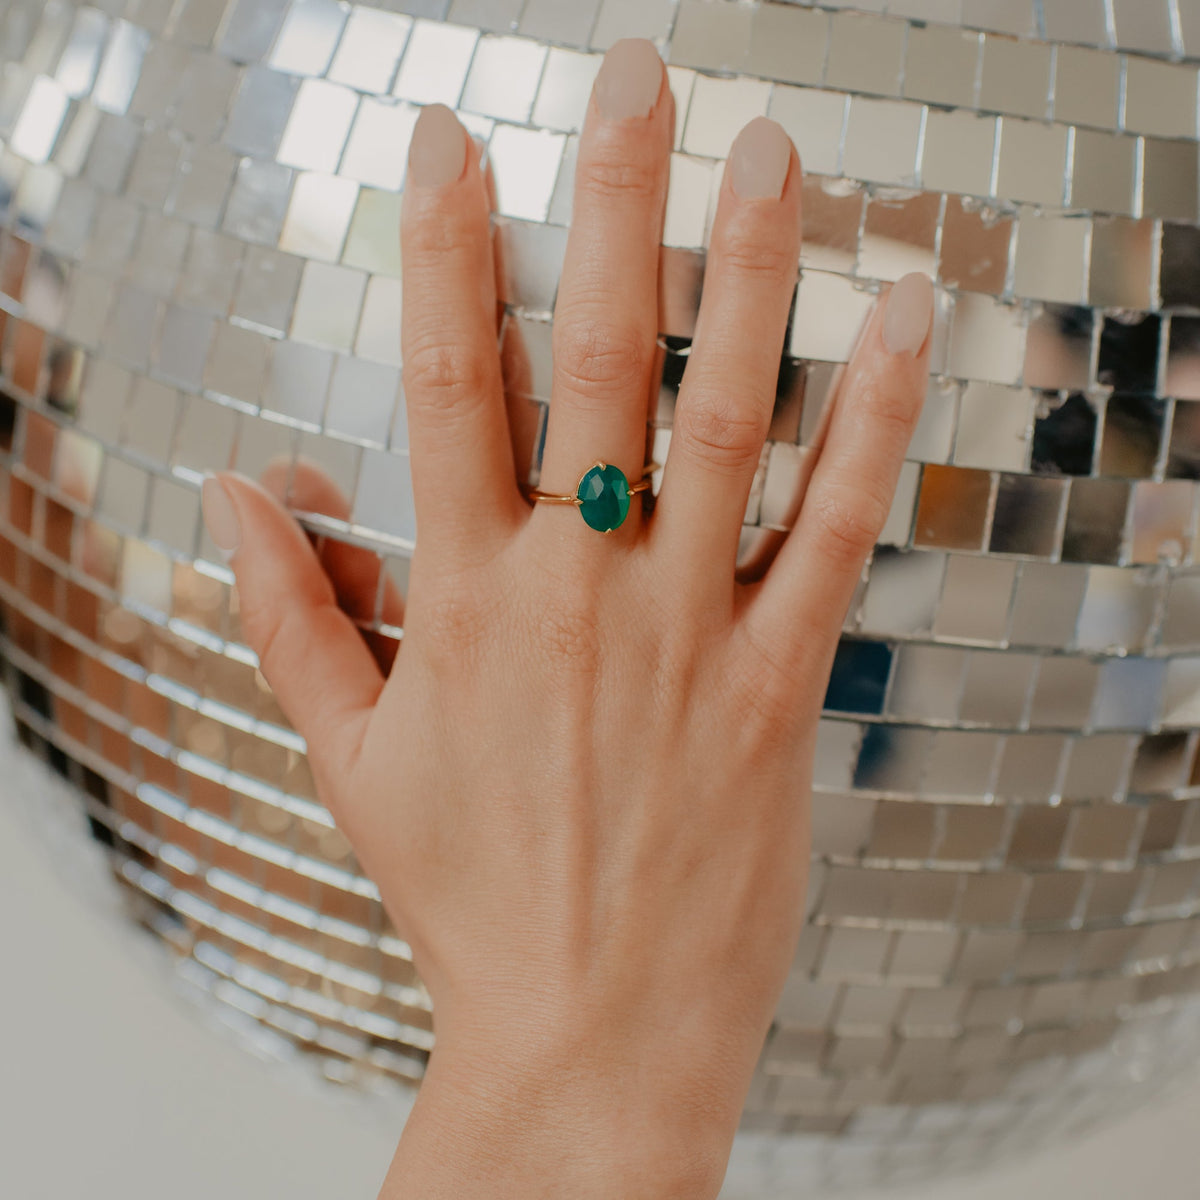 DAY 2 - KIND OVAL RING - EMERALD GREEN ONYX &amp; GOLD - SO PRETTY CARA COTTER